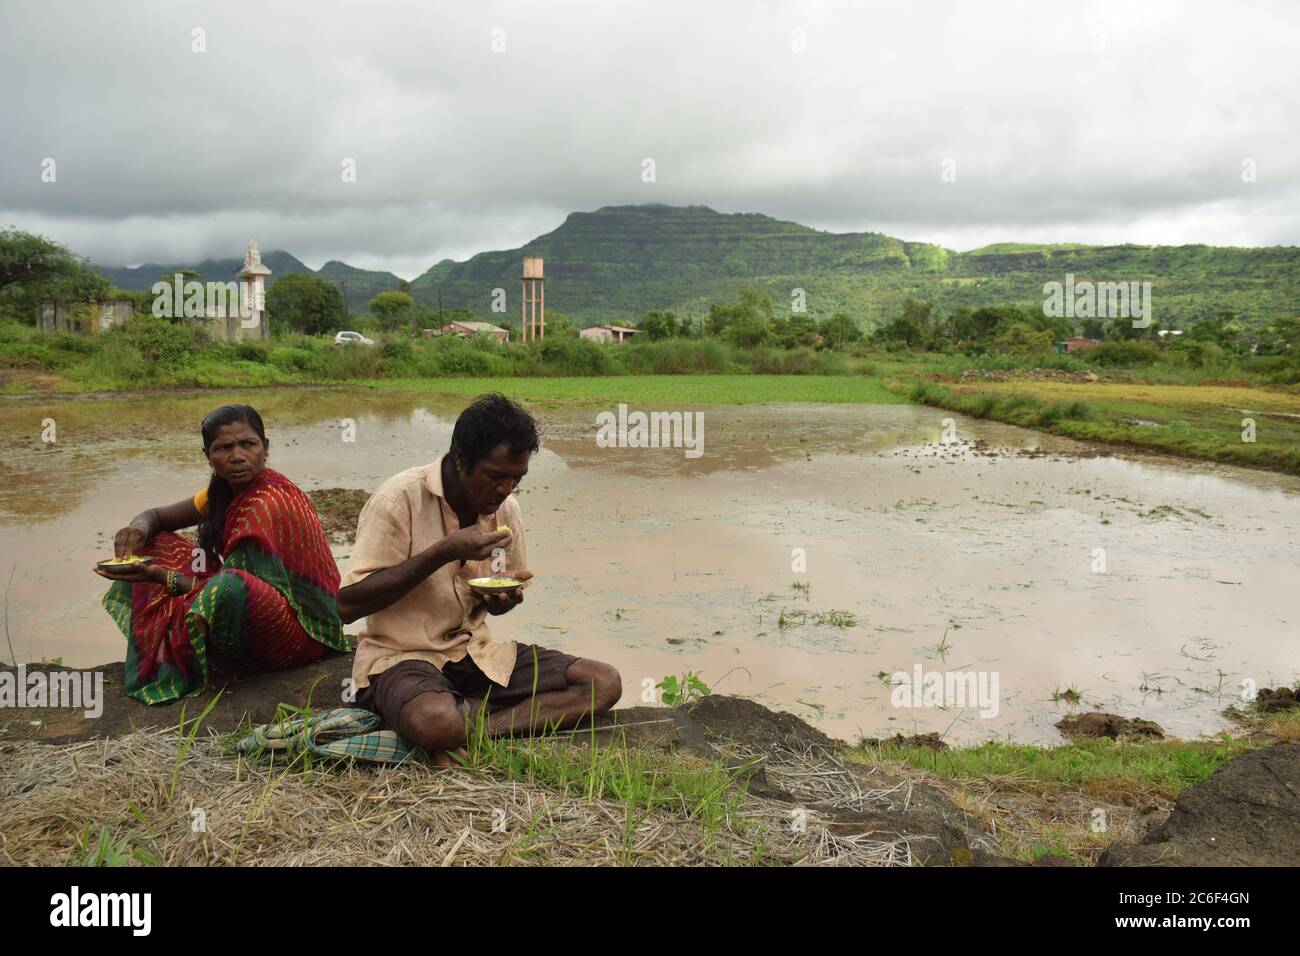 Akole village near Pune, India - July 3, 2020: Farmhands sow rice sampling at a flooded paddy field in Akole village near Pune, India, on Friday, July Stock Photo